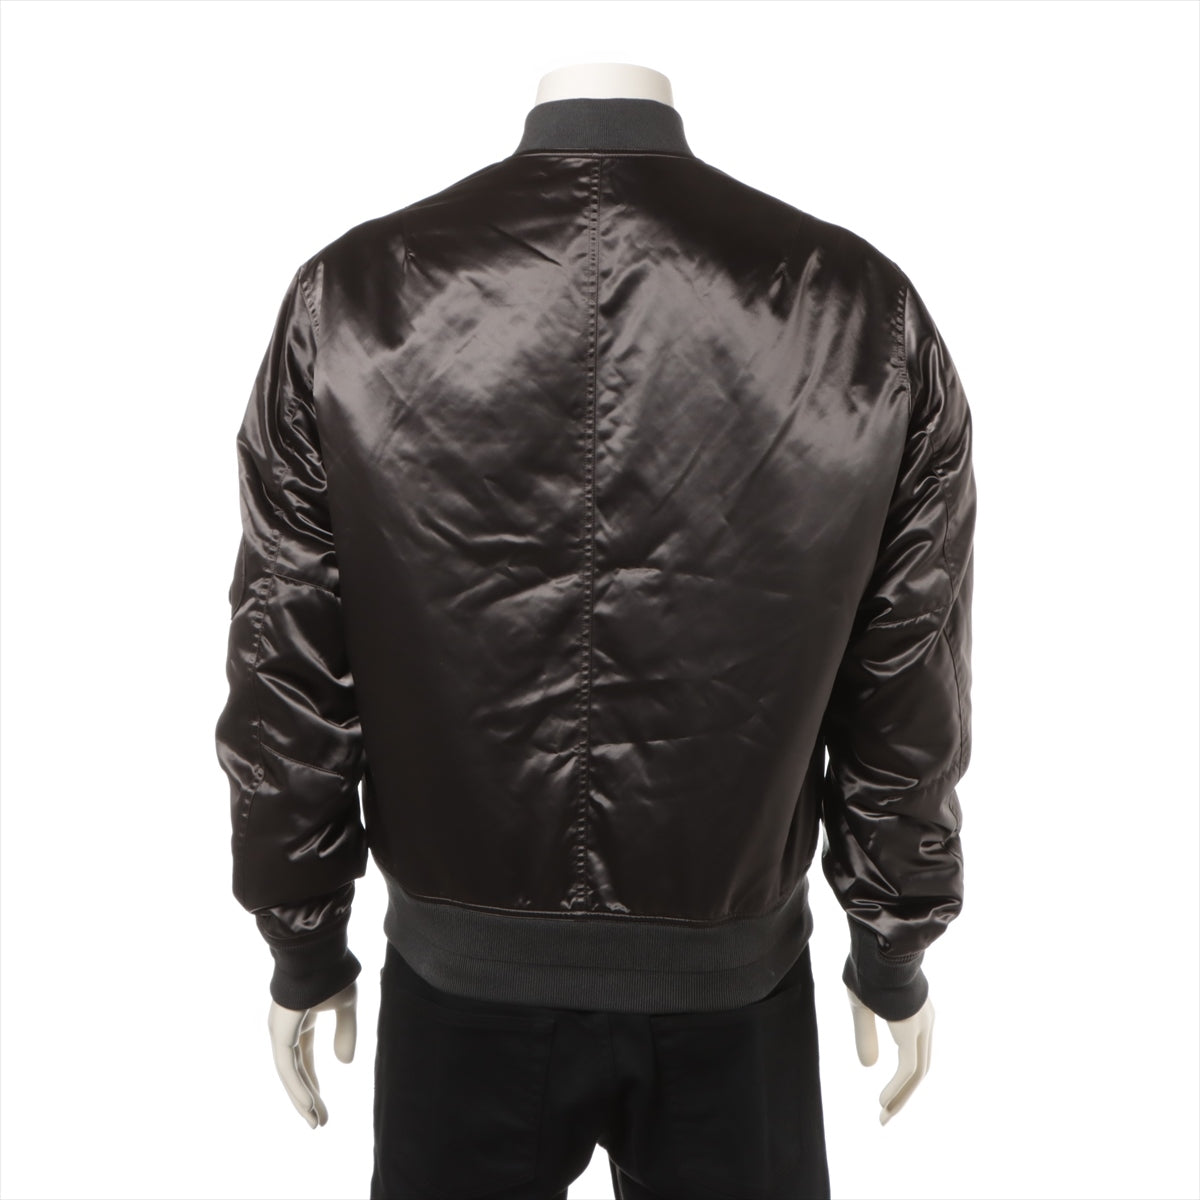 DIOR Nylon Insulated jacket 48 Men's Brown  943C437A4656 BOMBER JACKET